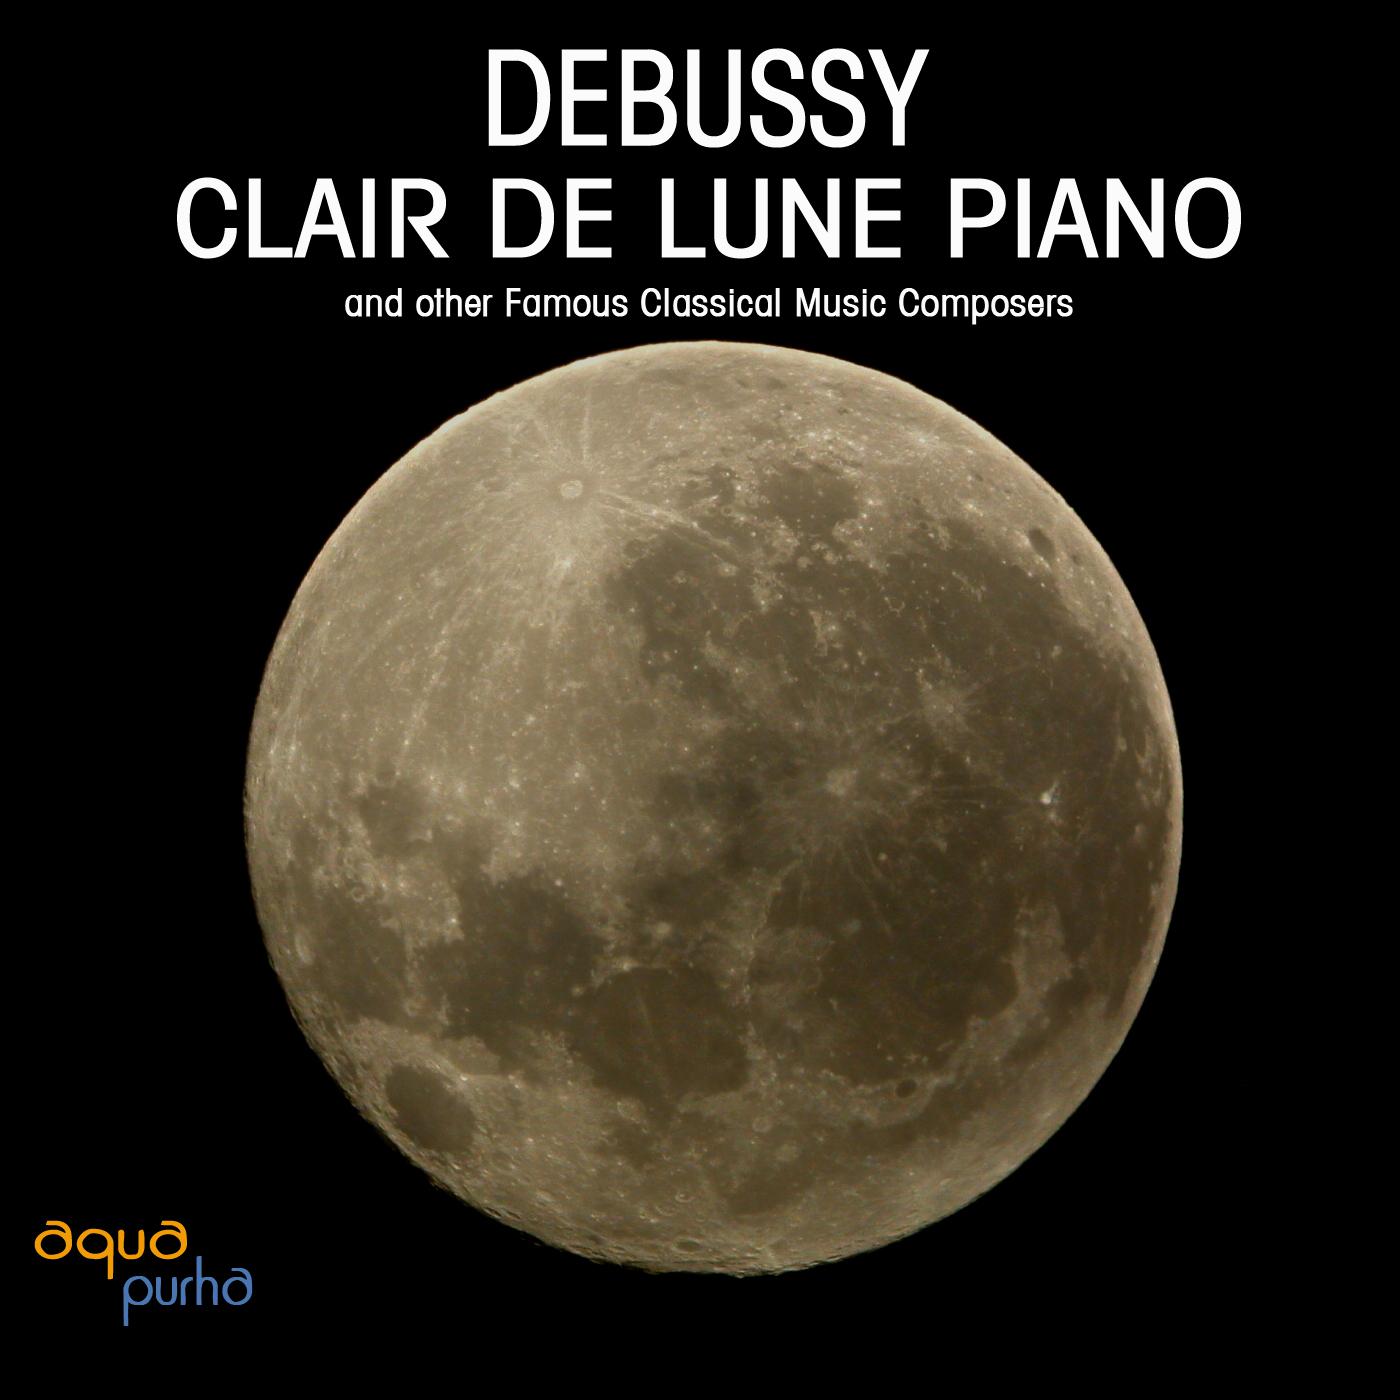 Debussy: Clair de Lune Piano and Other Famous Classical Music Composers